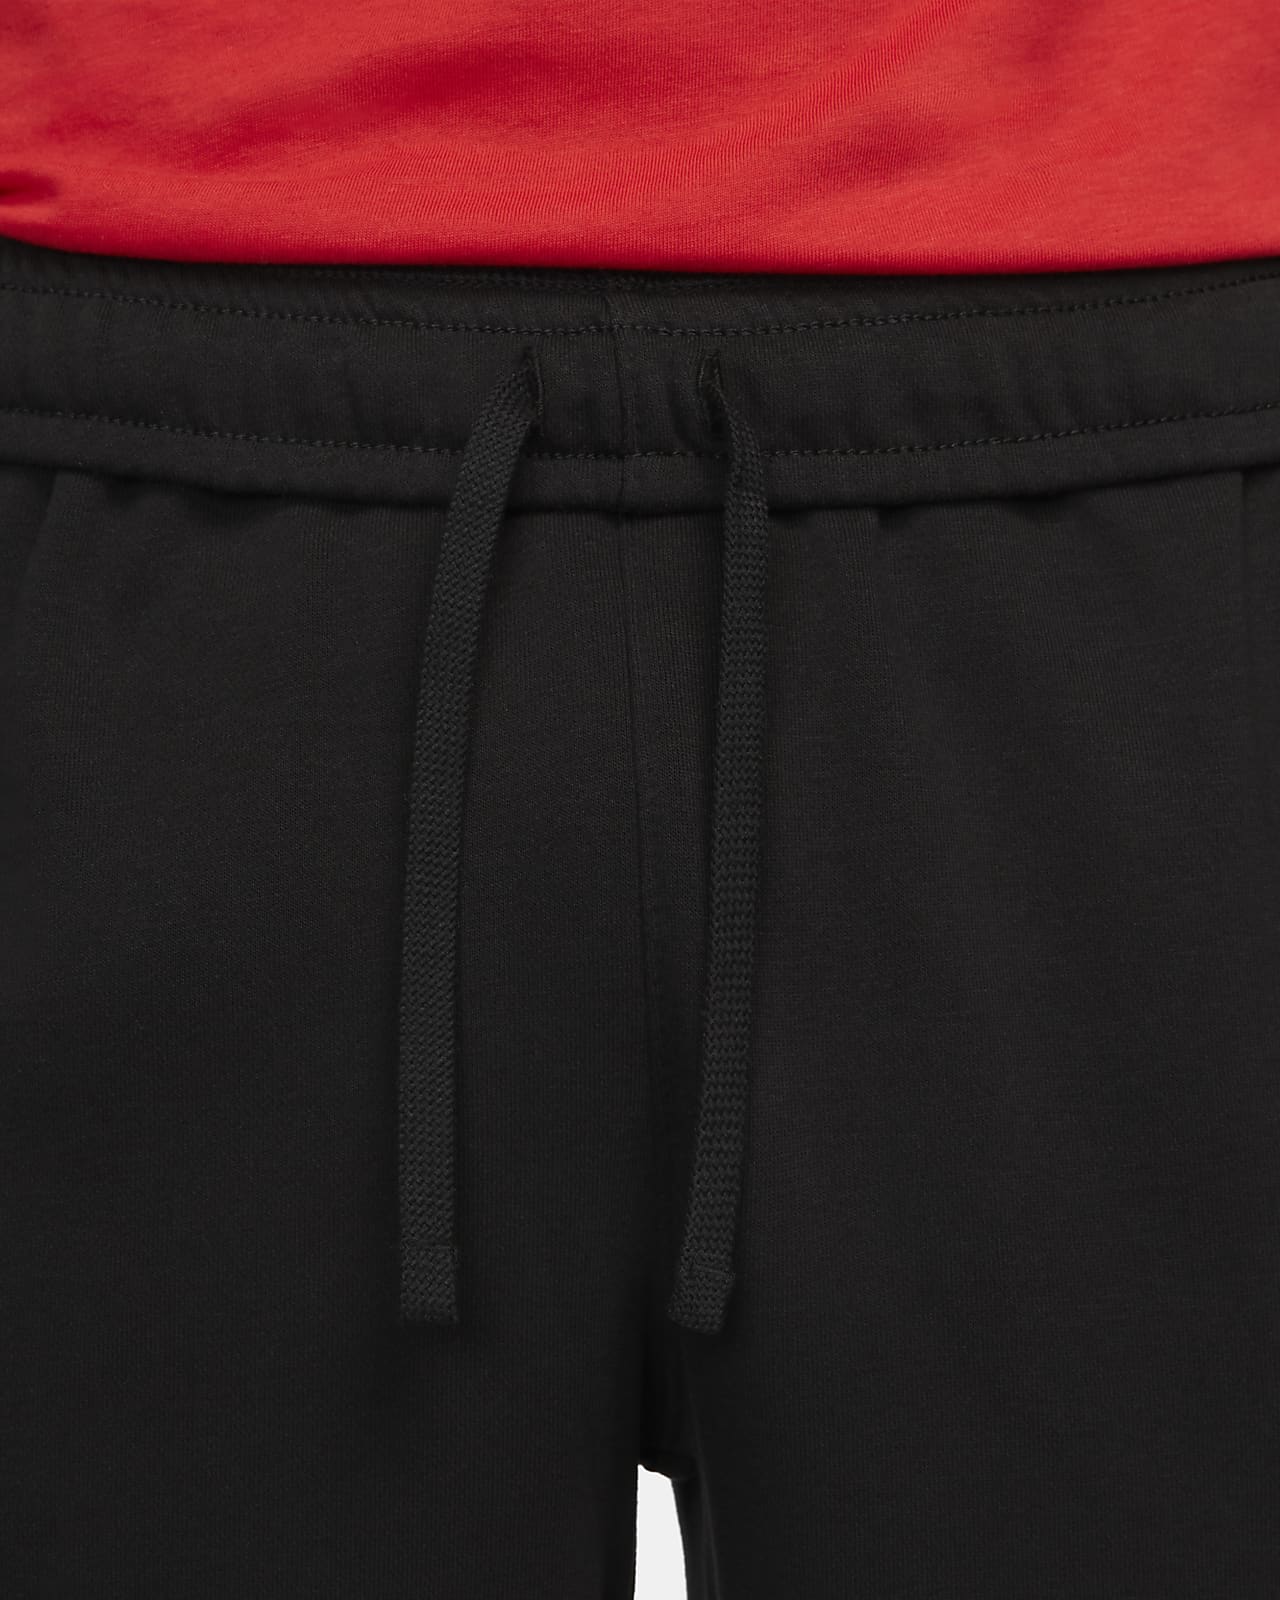 Nike Modern French Terry Cuff Men's Tapered Sweatpants Style 807920-063  MSRP $85